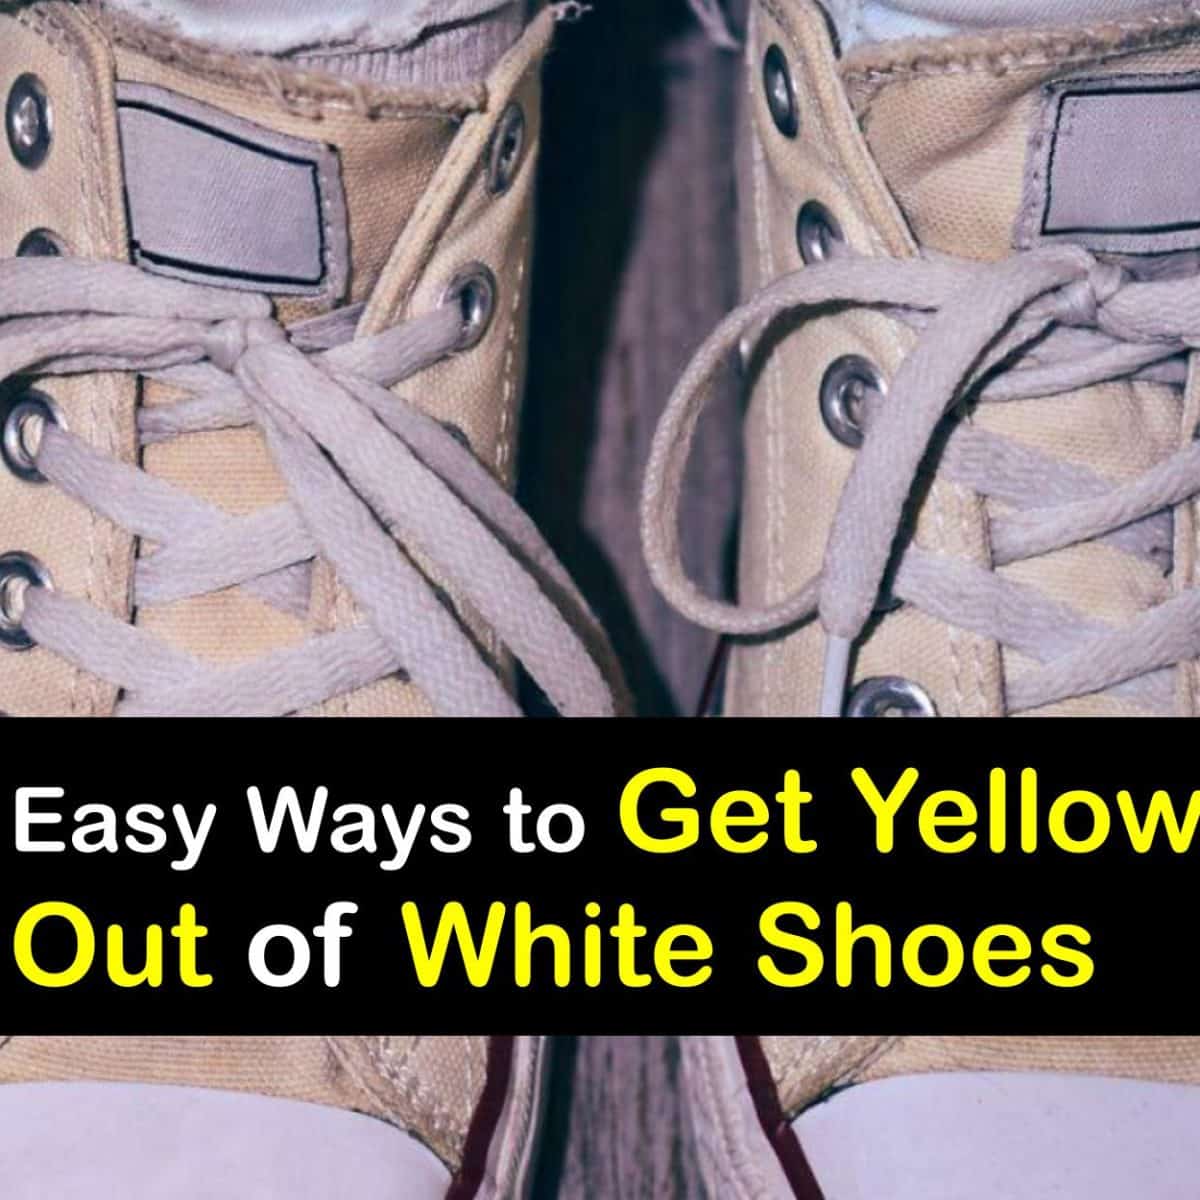 Shoe Stains - Yellow Spots on White